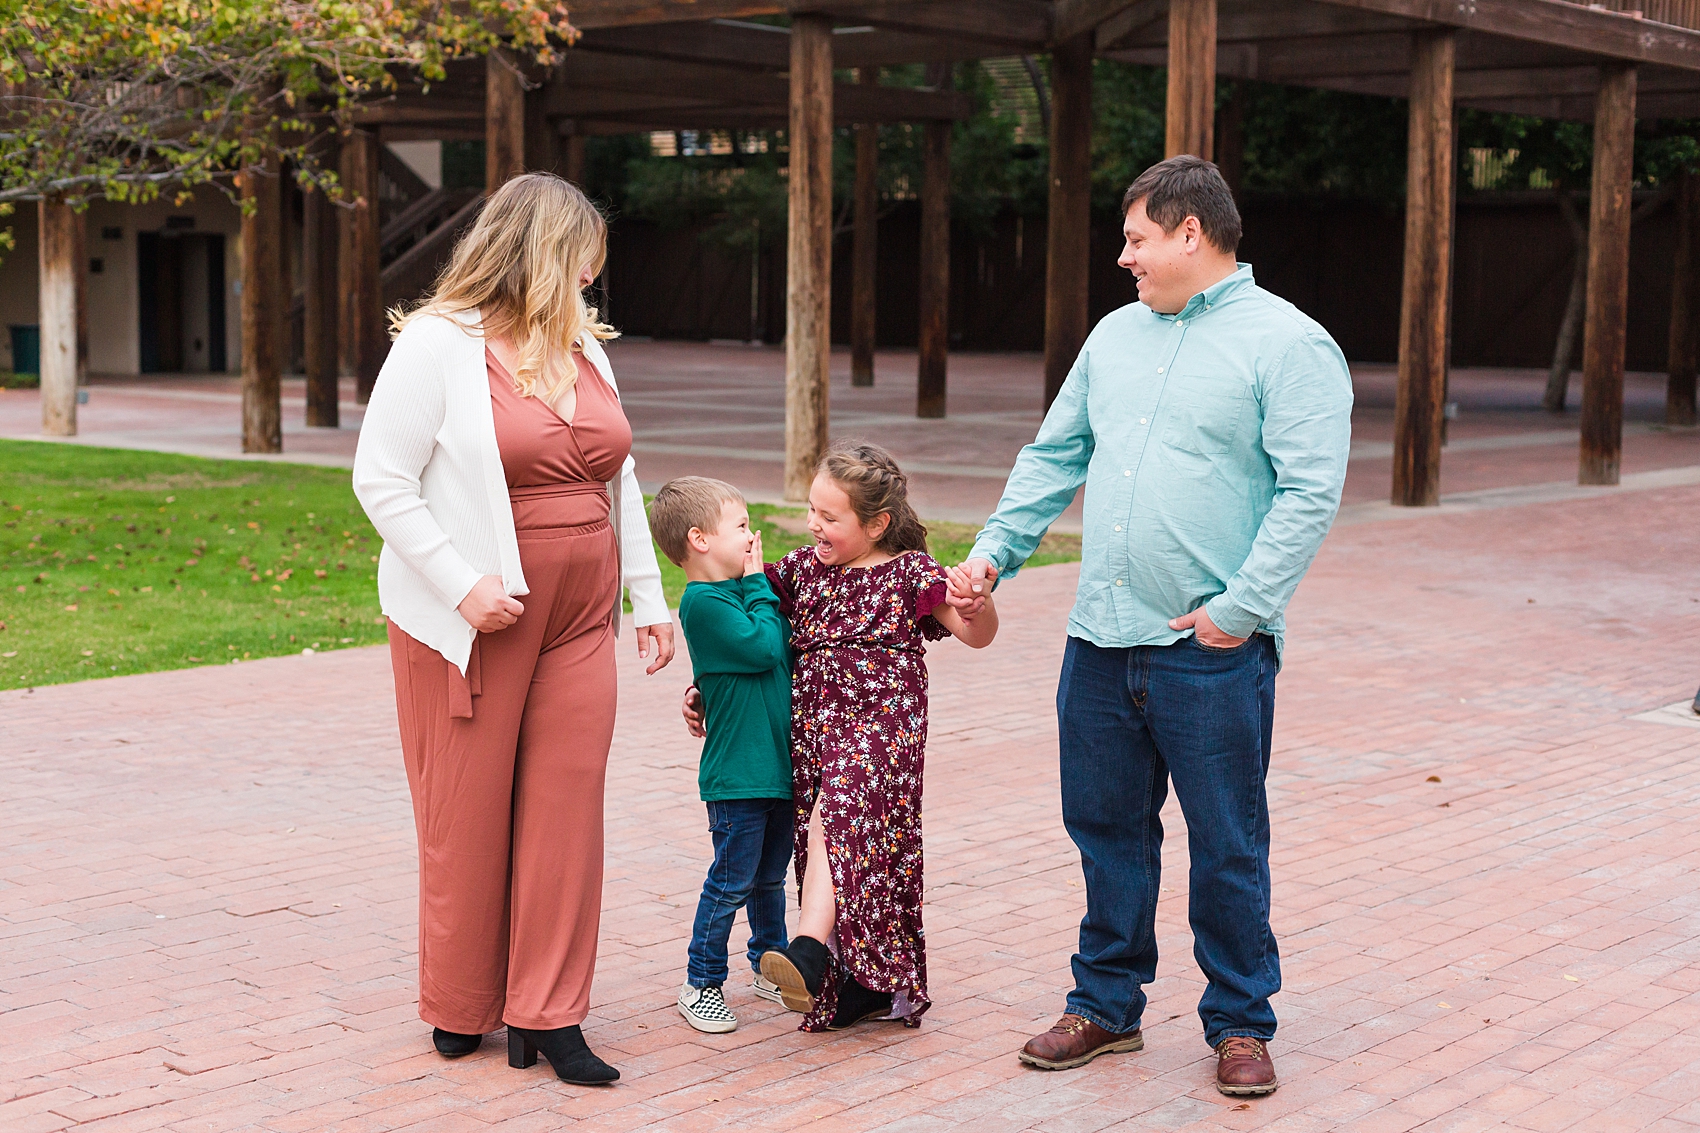 Leah Hope Photography | Scottsdale Phoenix Arizona | Downtown Phoenix Heritage Square | Family Pictures | What to Wear | Family Photos Poses